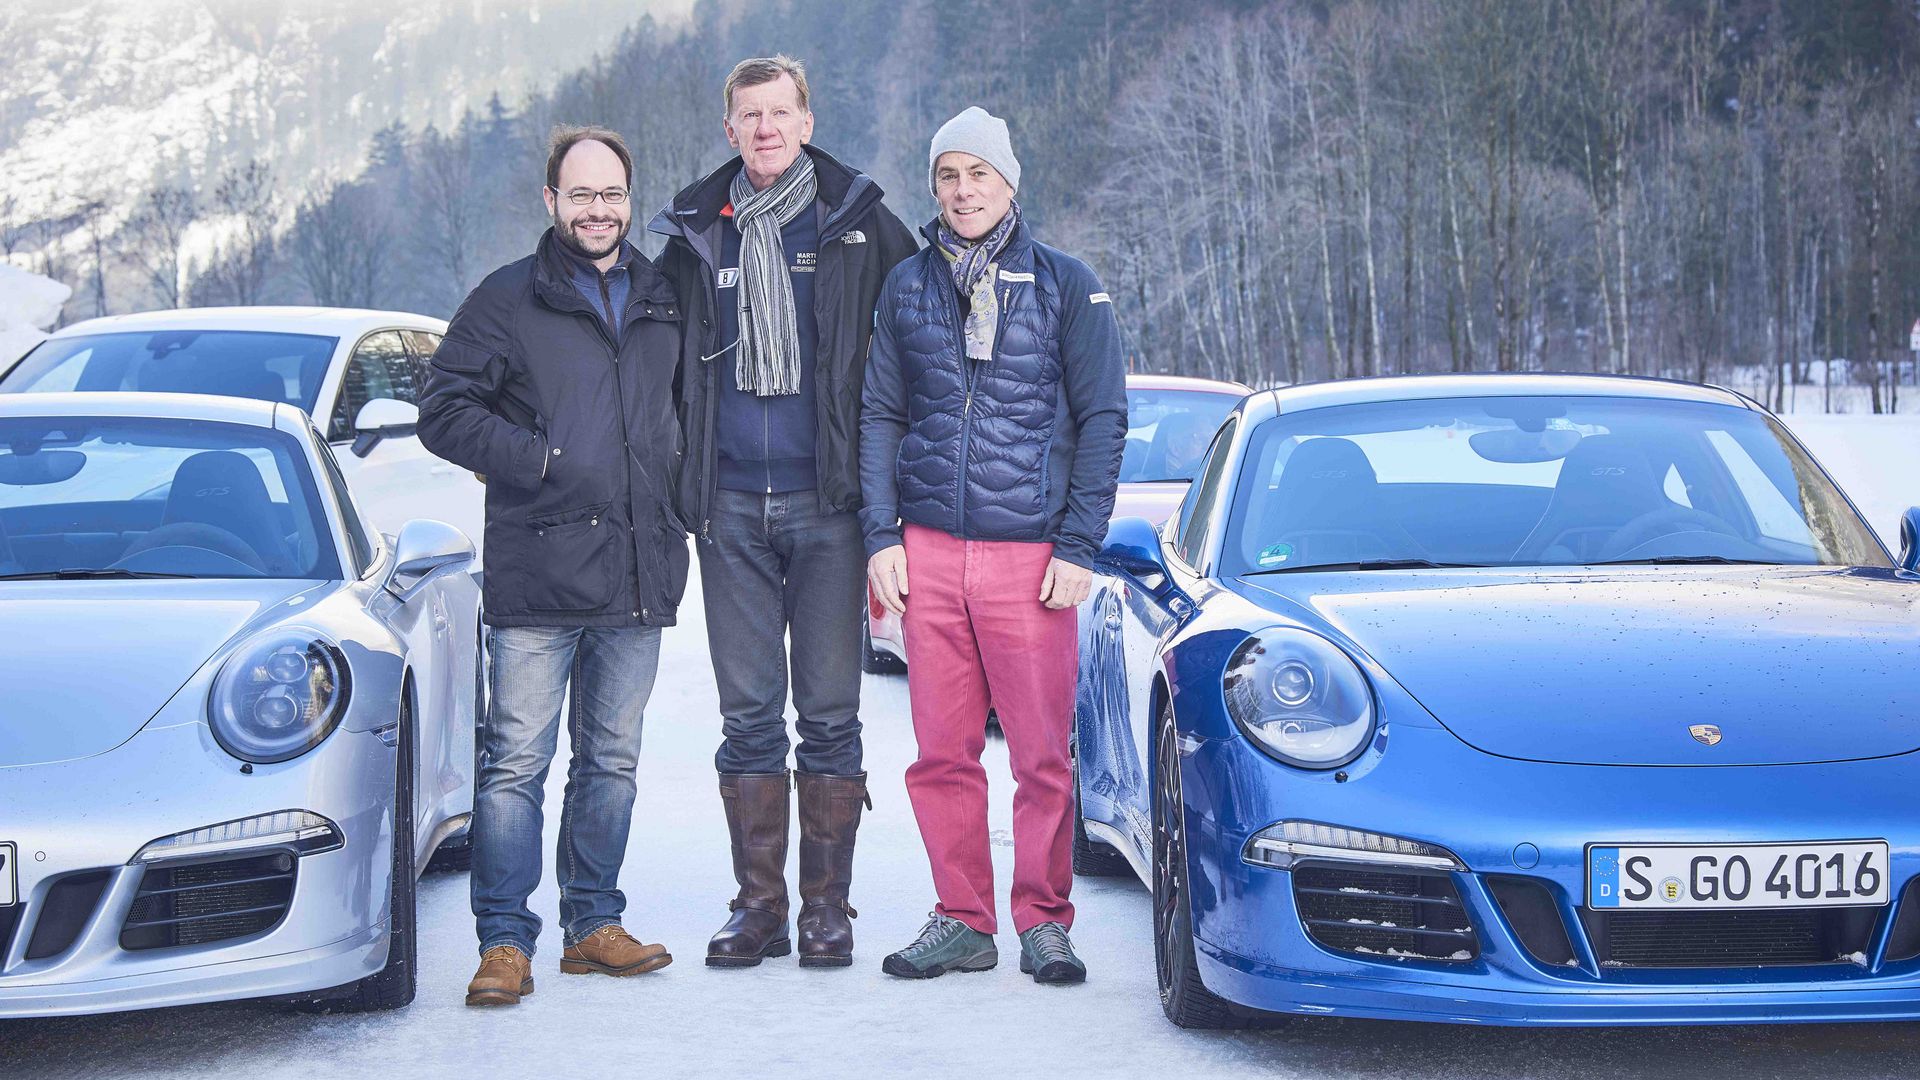 Walter Roehrl get to grips with Porsche “ice-driving”.